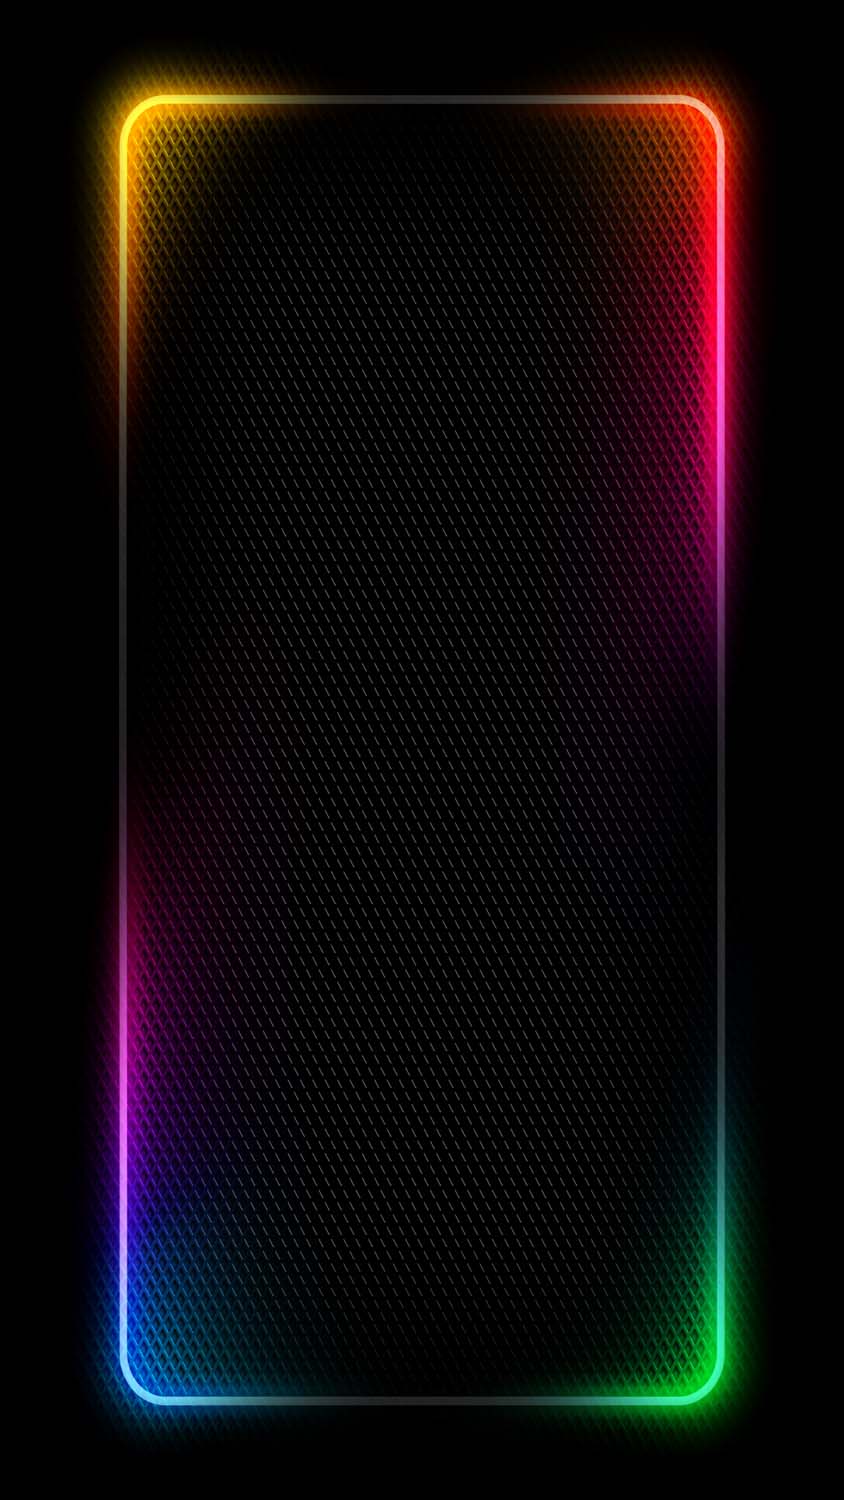 Pin on Hd phone wallpapers